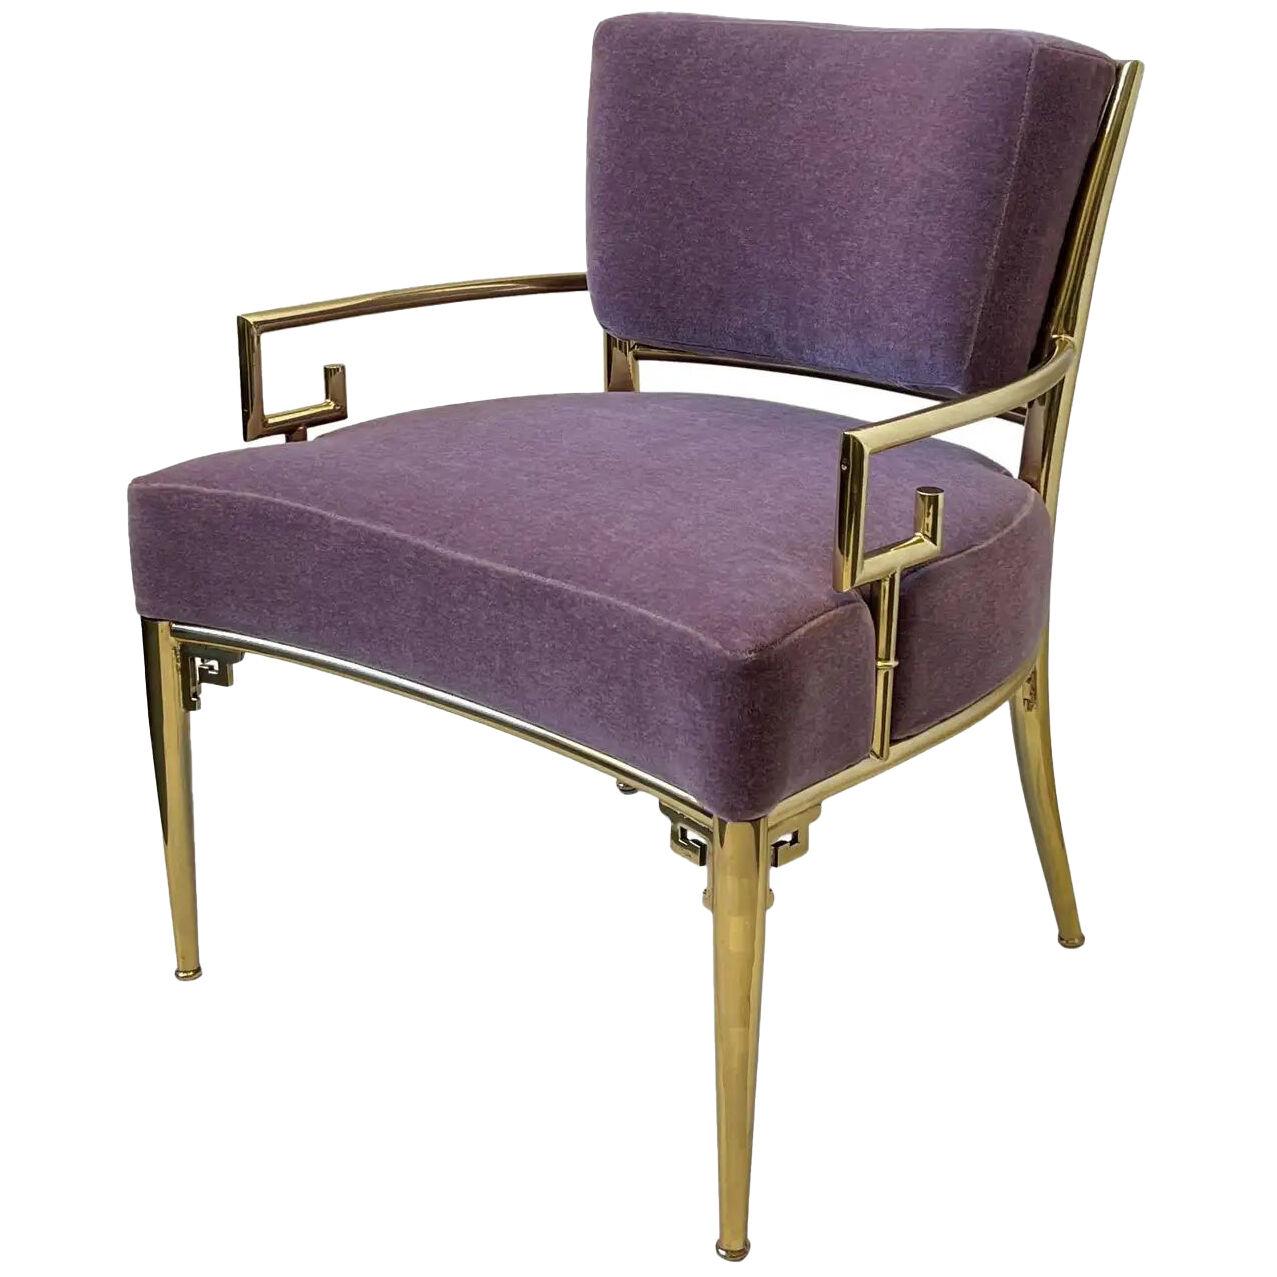 Brass and Purple Mohair Greek Key Lounge Chair by Mastercraft